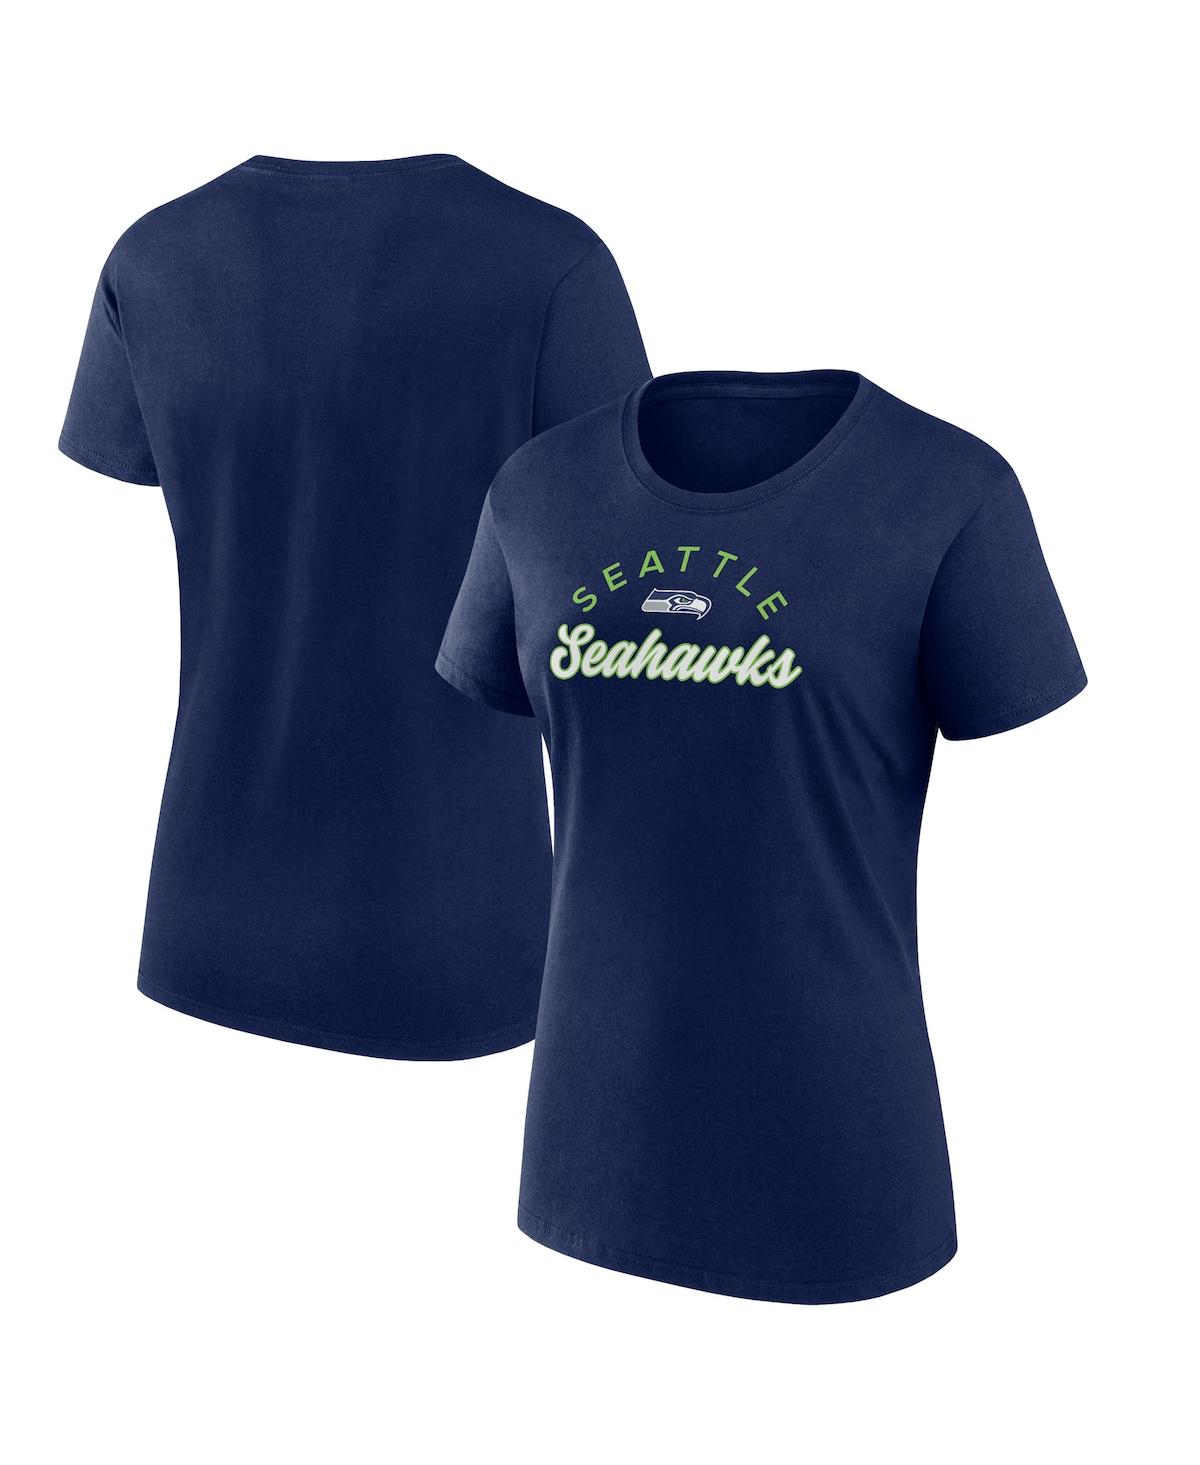 Fanatics Women's  College Navy Seattle Seahawks Primary Component T-shirt